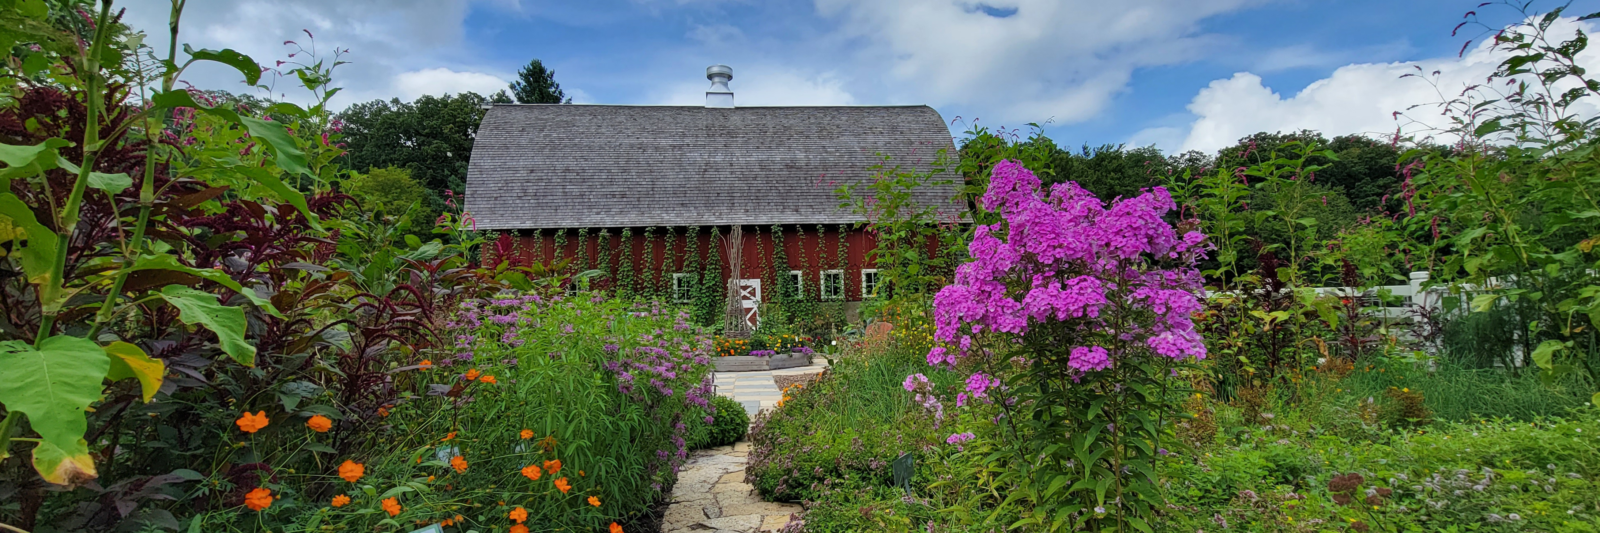 Garden with a red barn in the background.